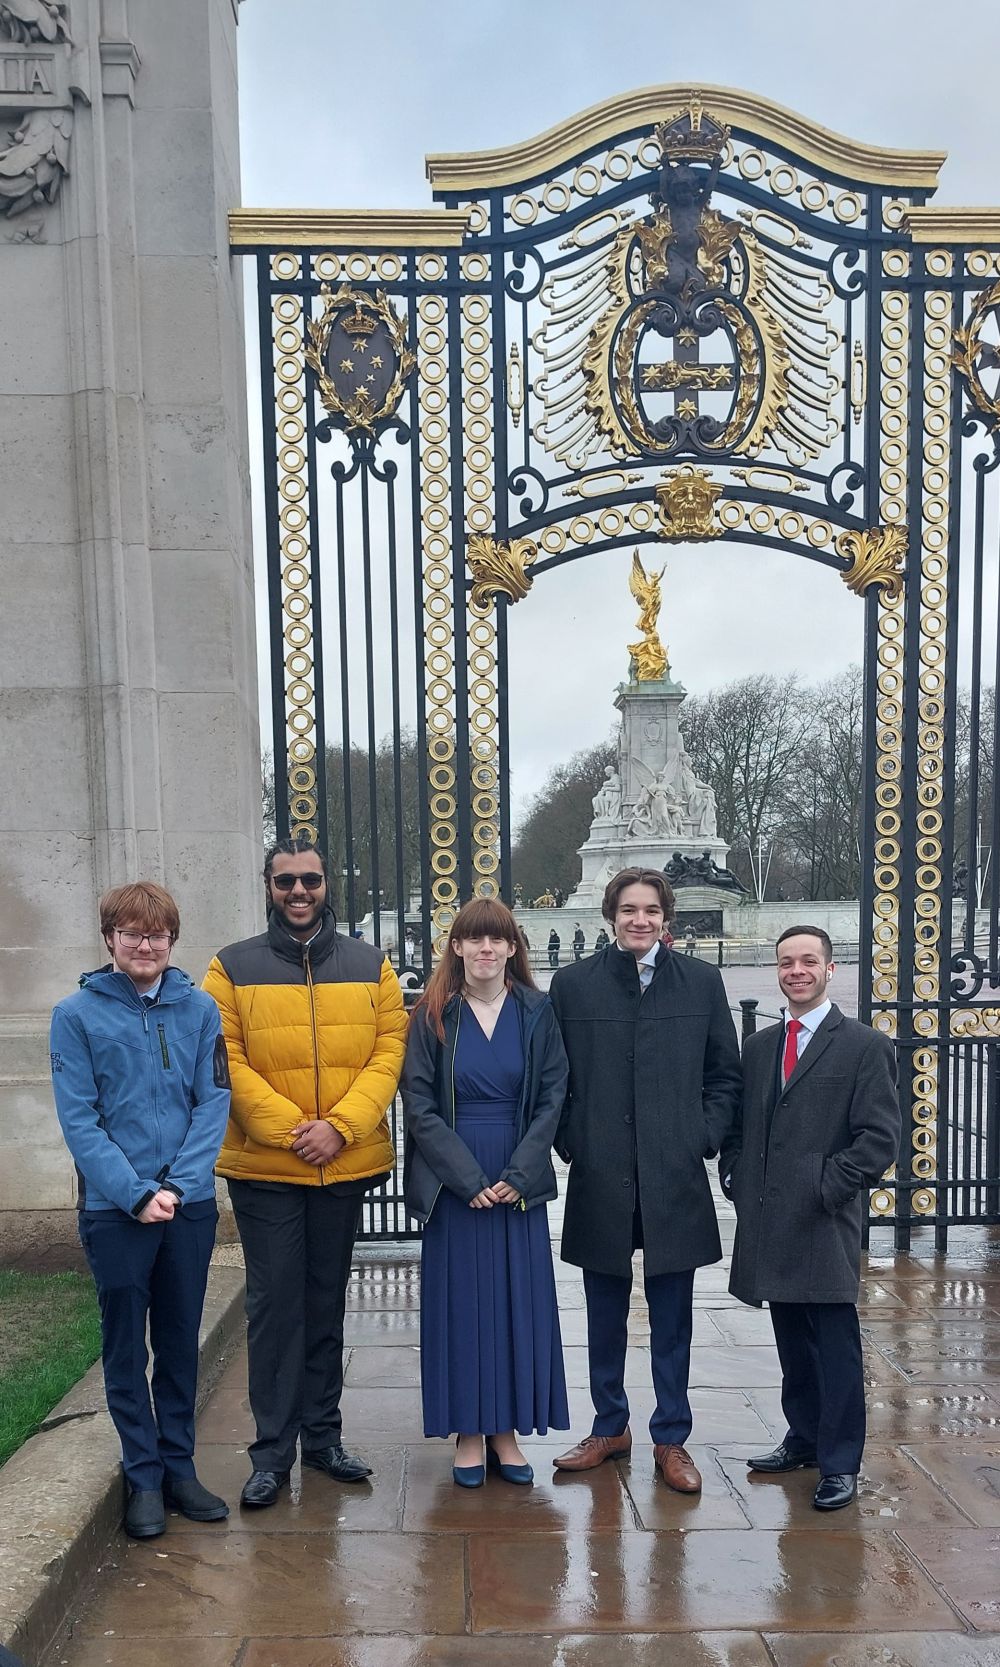 Space Engineering learners outside Buckingham Palace